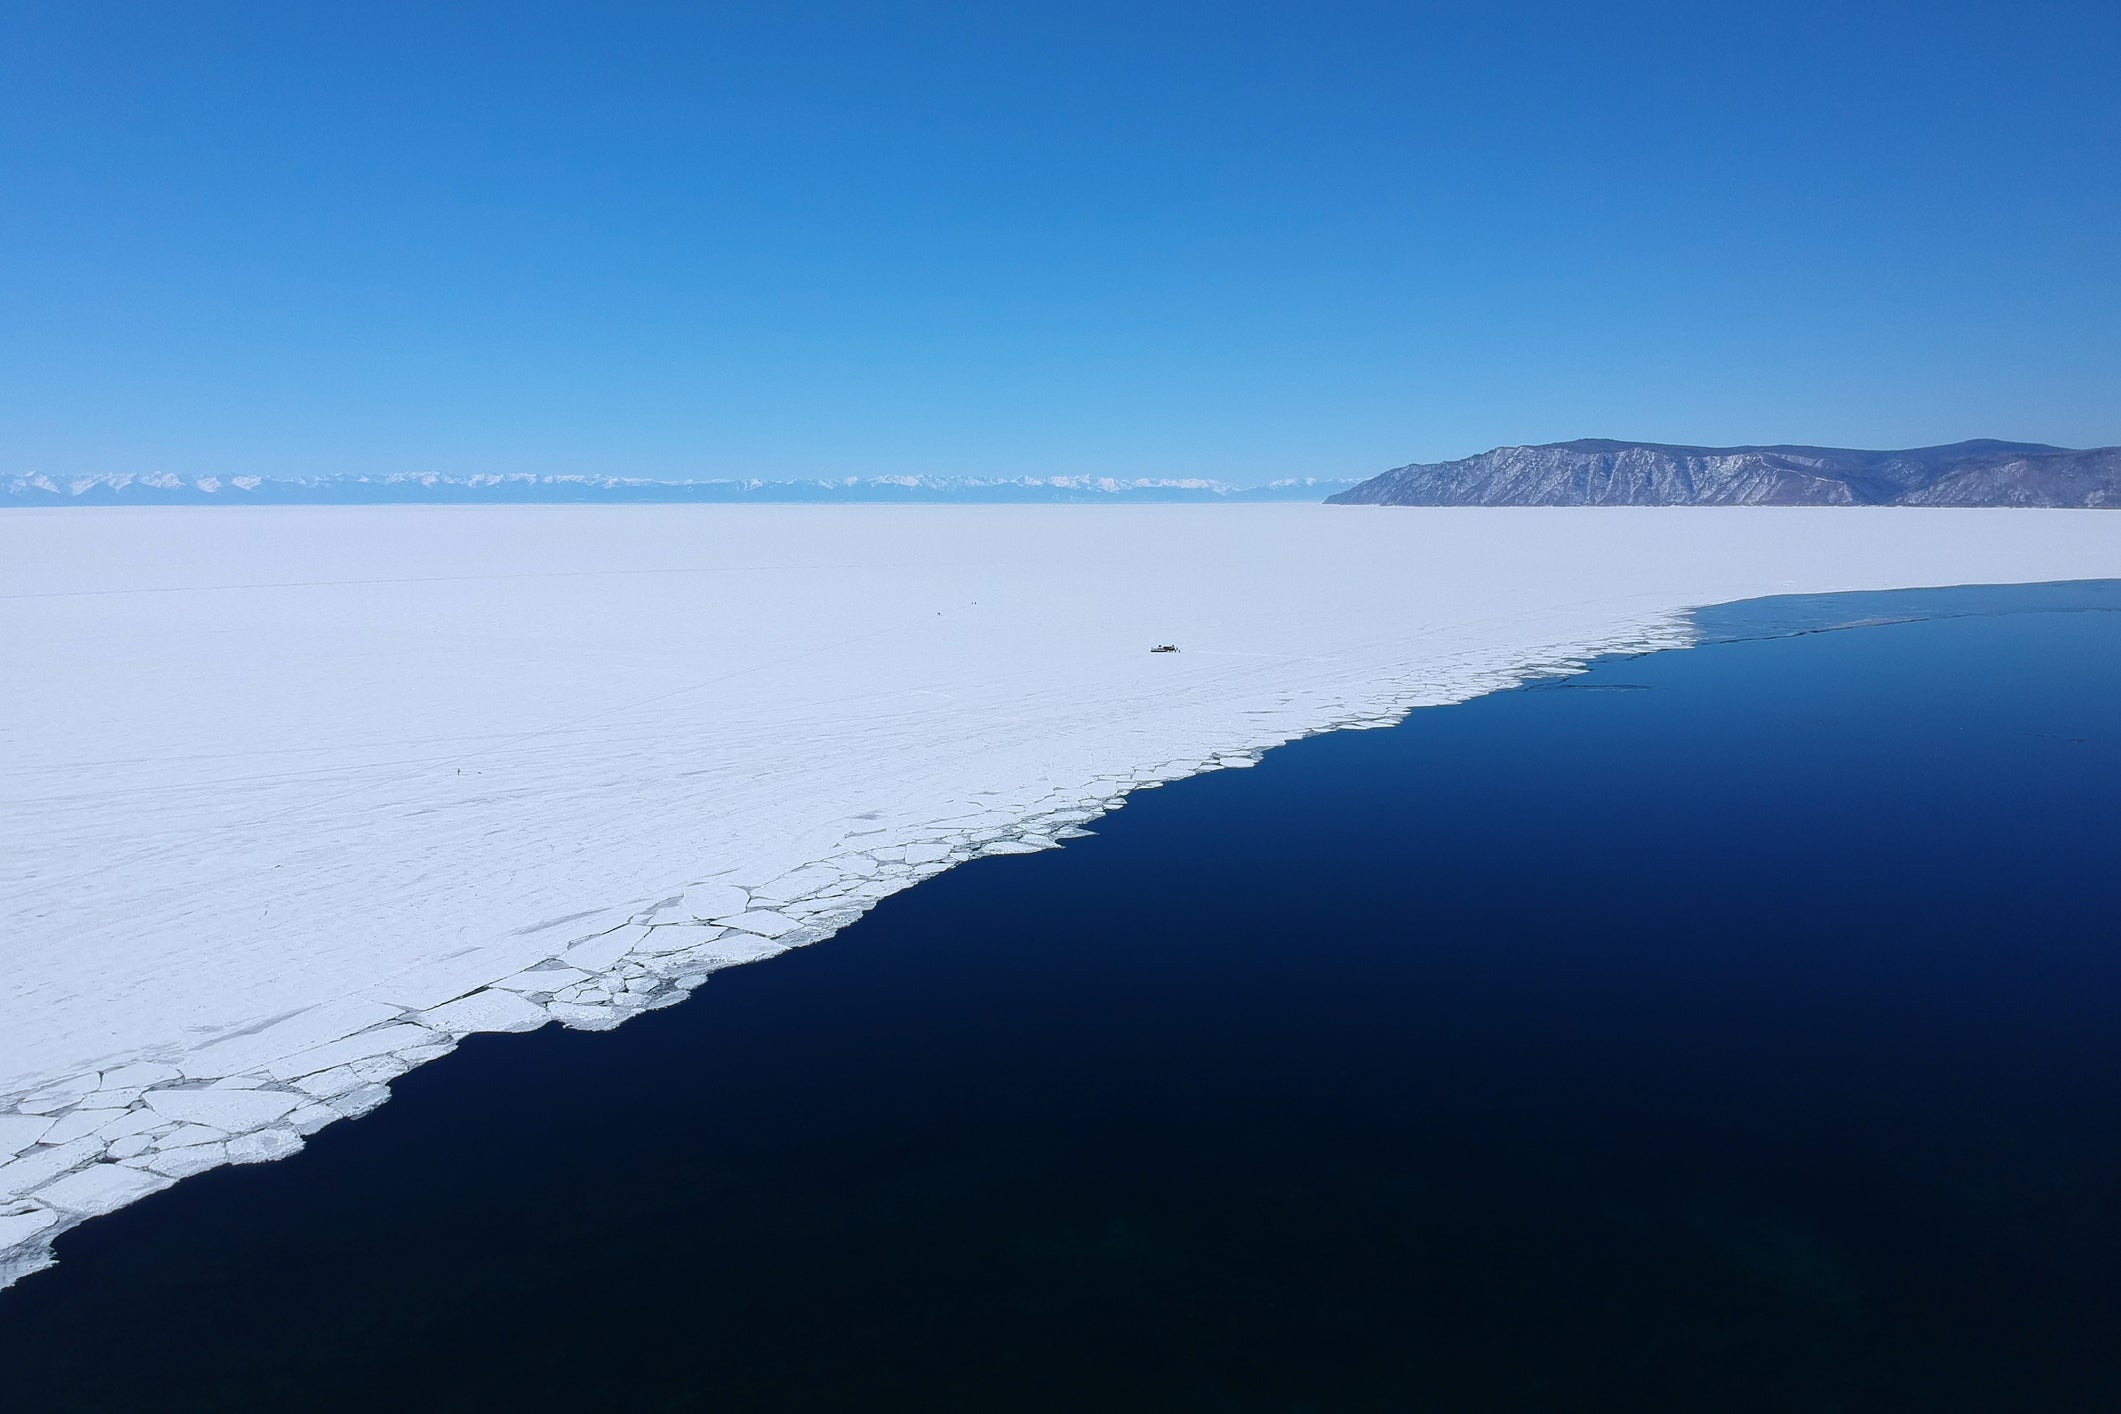 The Arctic is warming four times faster than the rest of the world